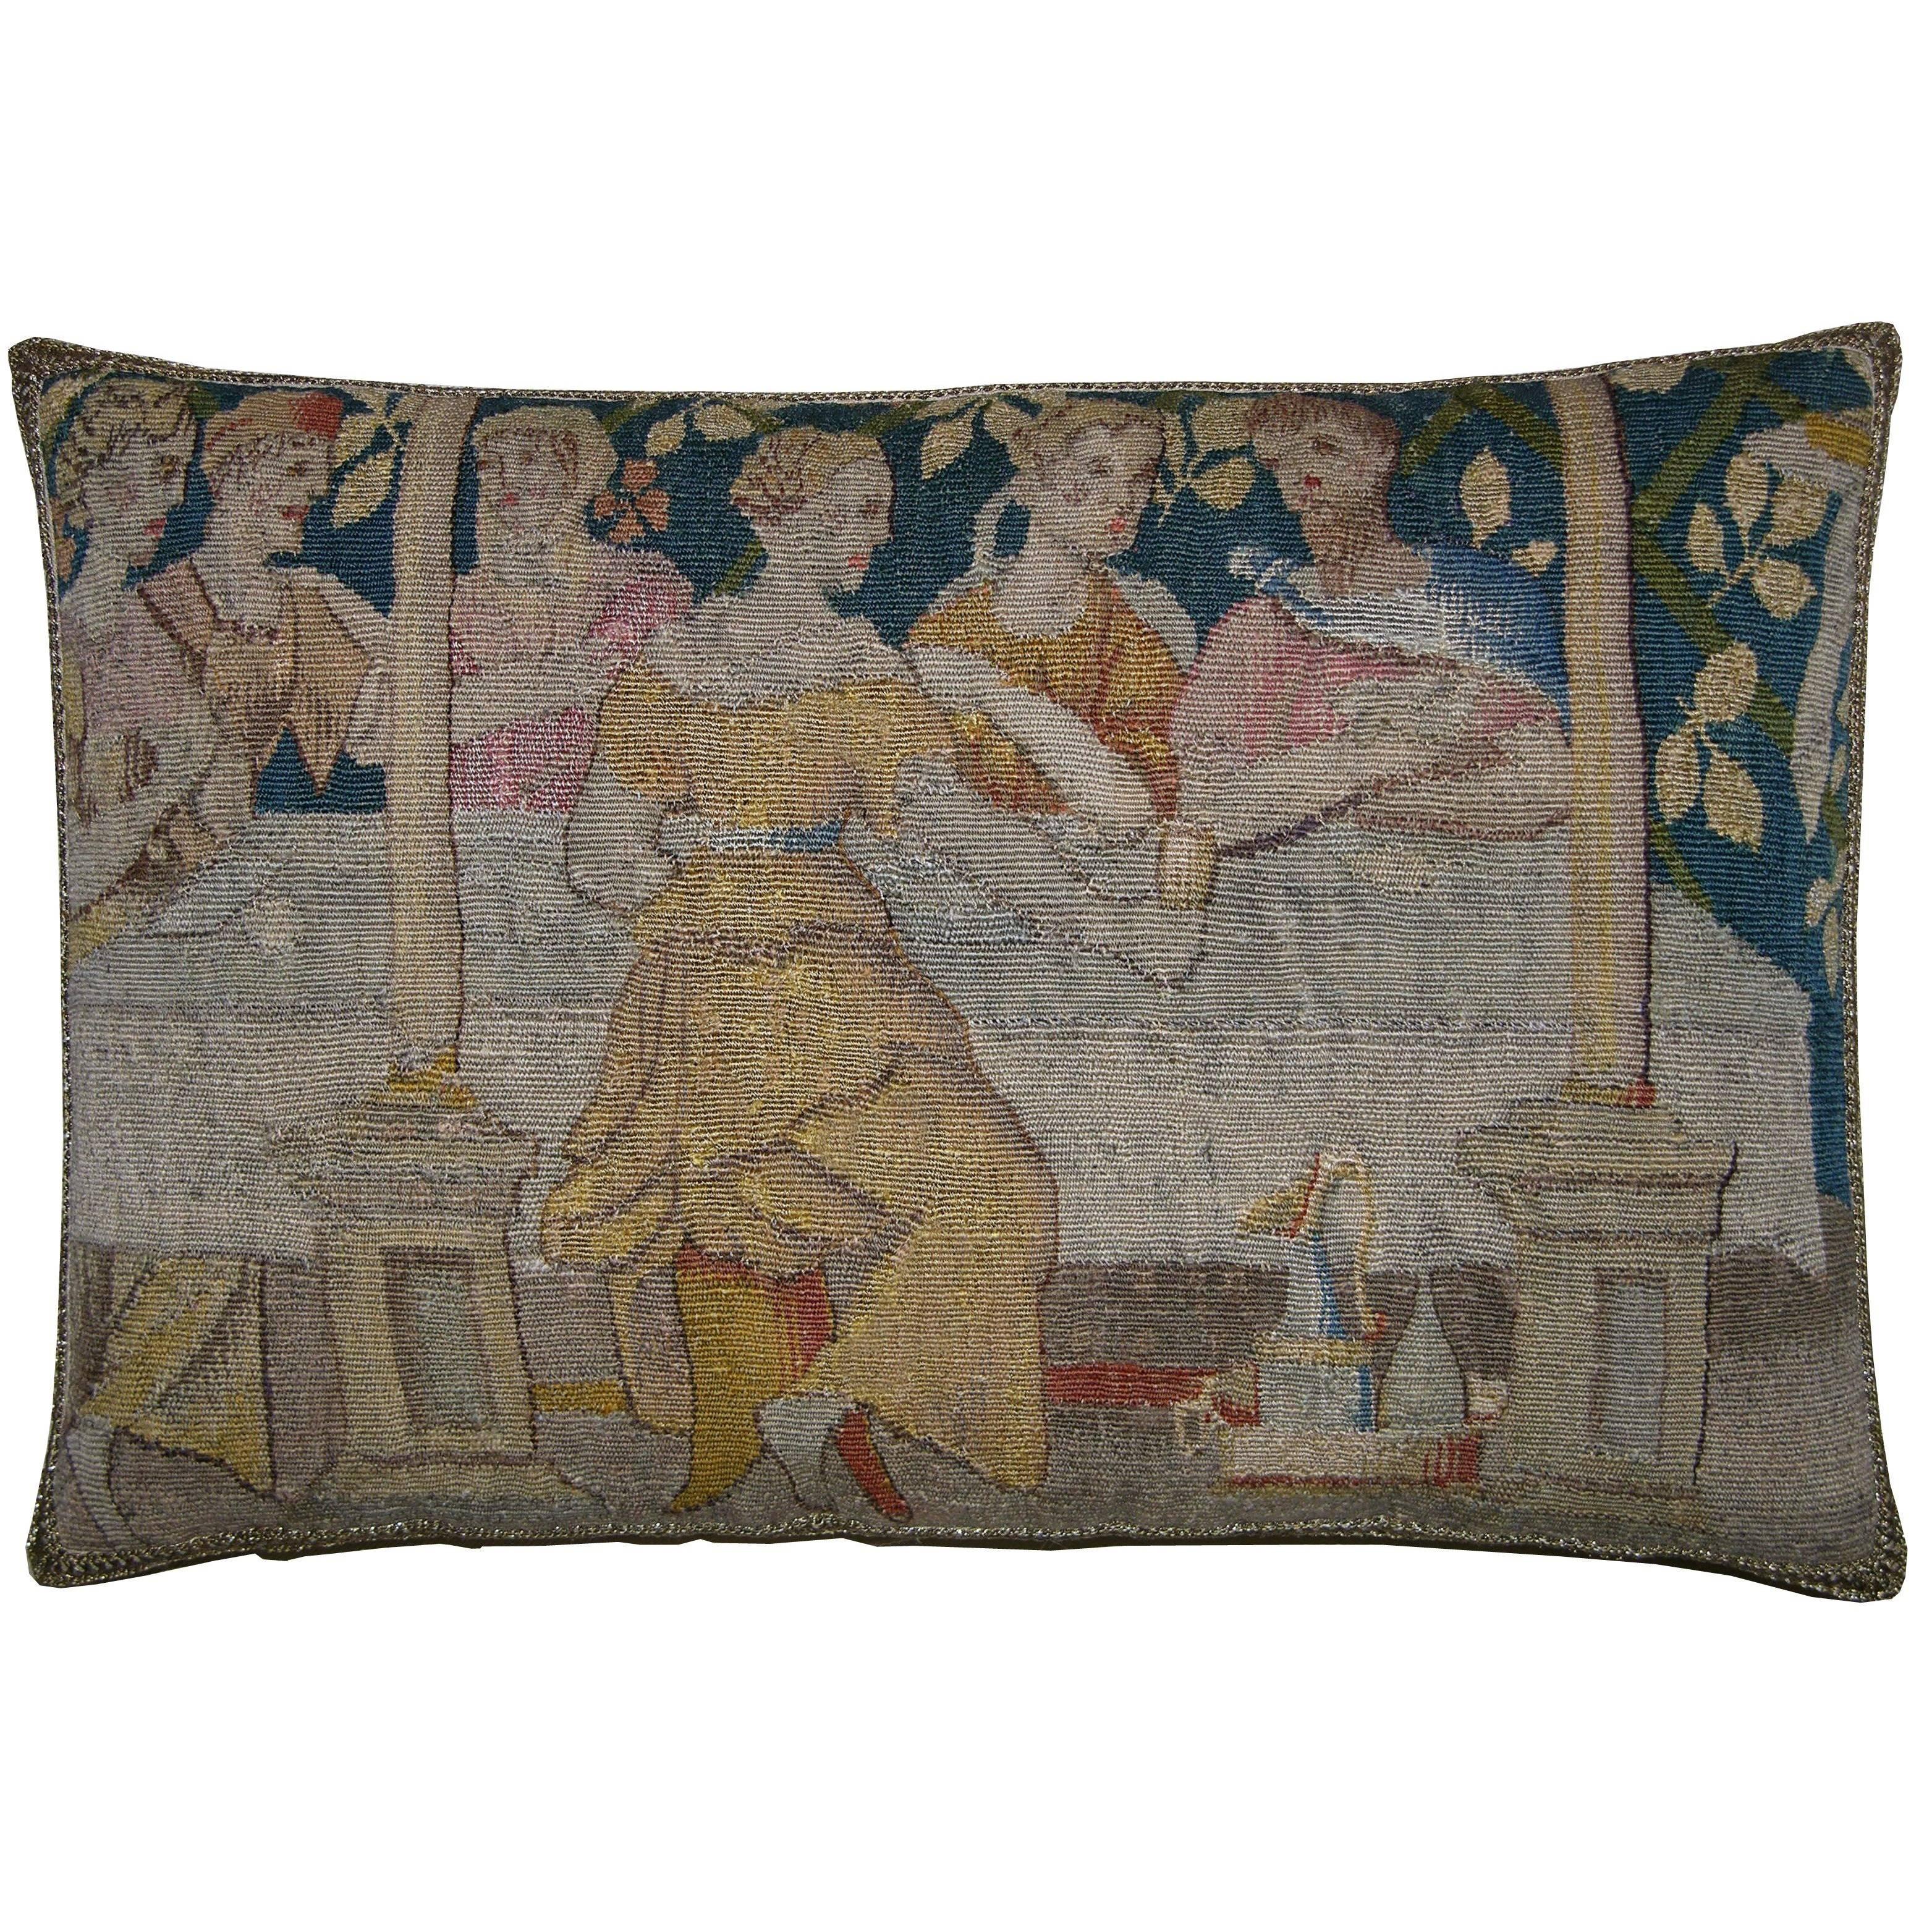 Antique Brussels Tapestry Pillow, circa 17th Century For Sale